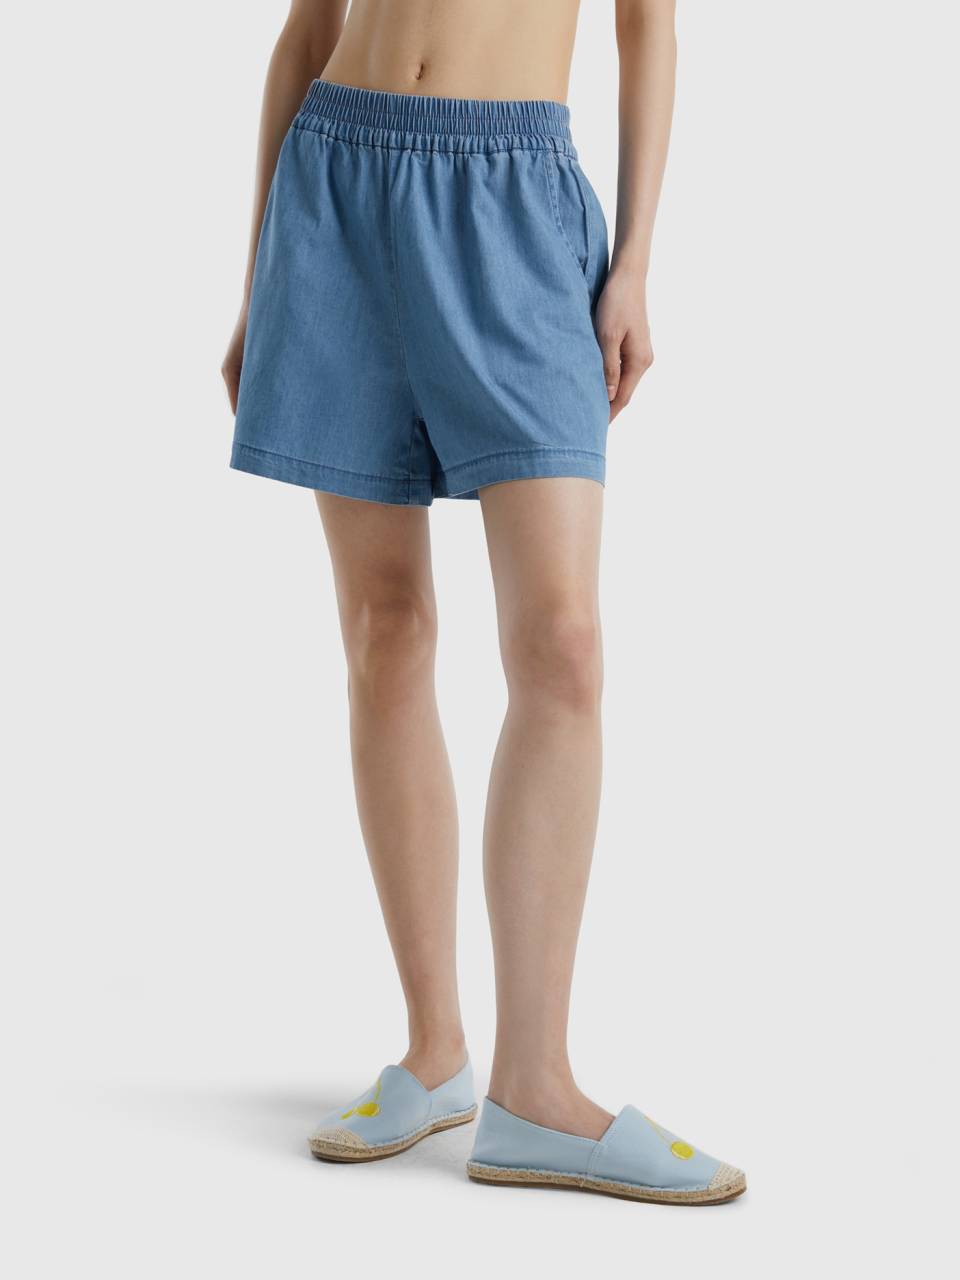 Benetton shorts in chambray. 1